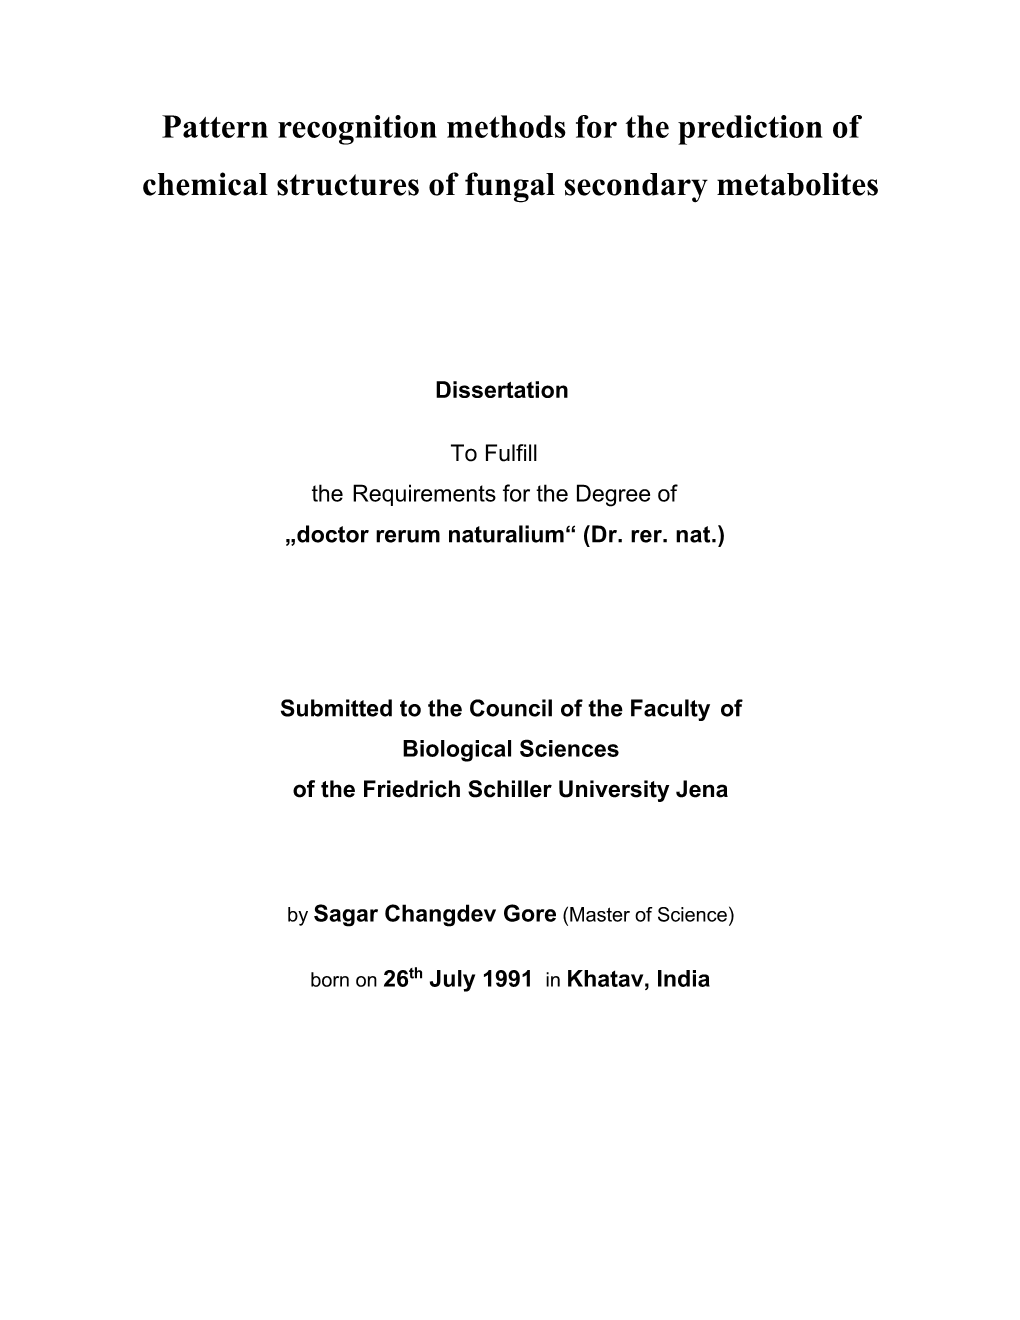 Pattern Recognition Methods for the Prediction of Chemical Structures of Fungal Secondary Metabolites